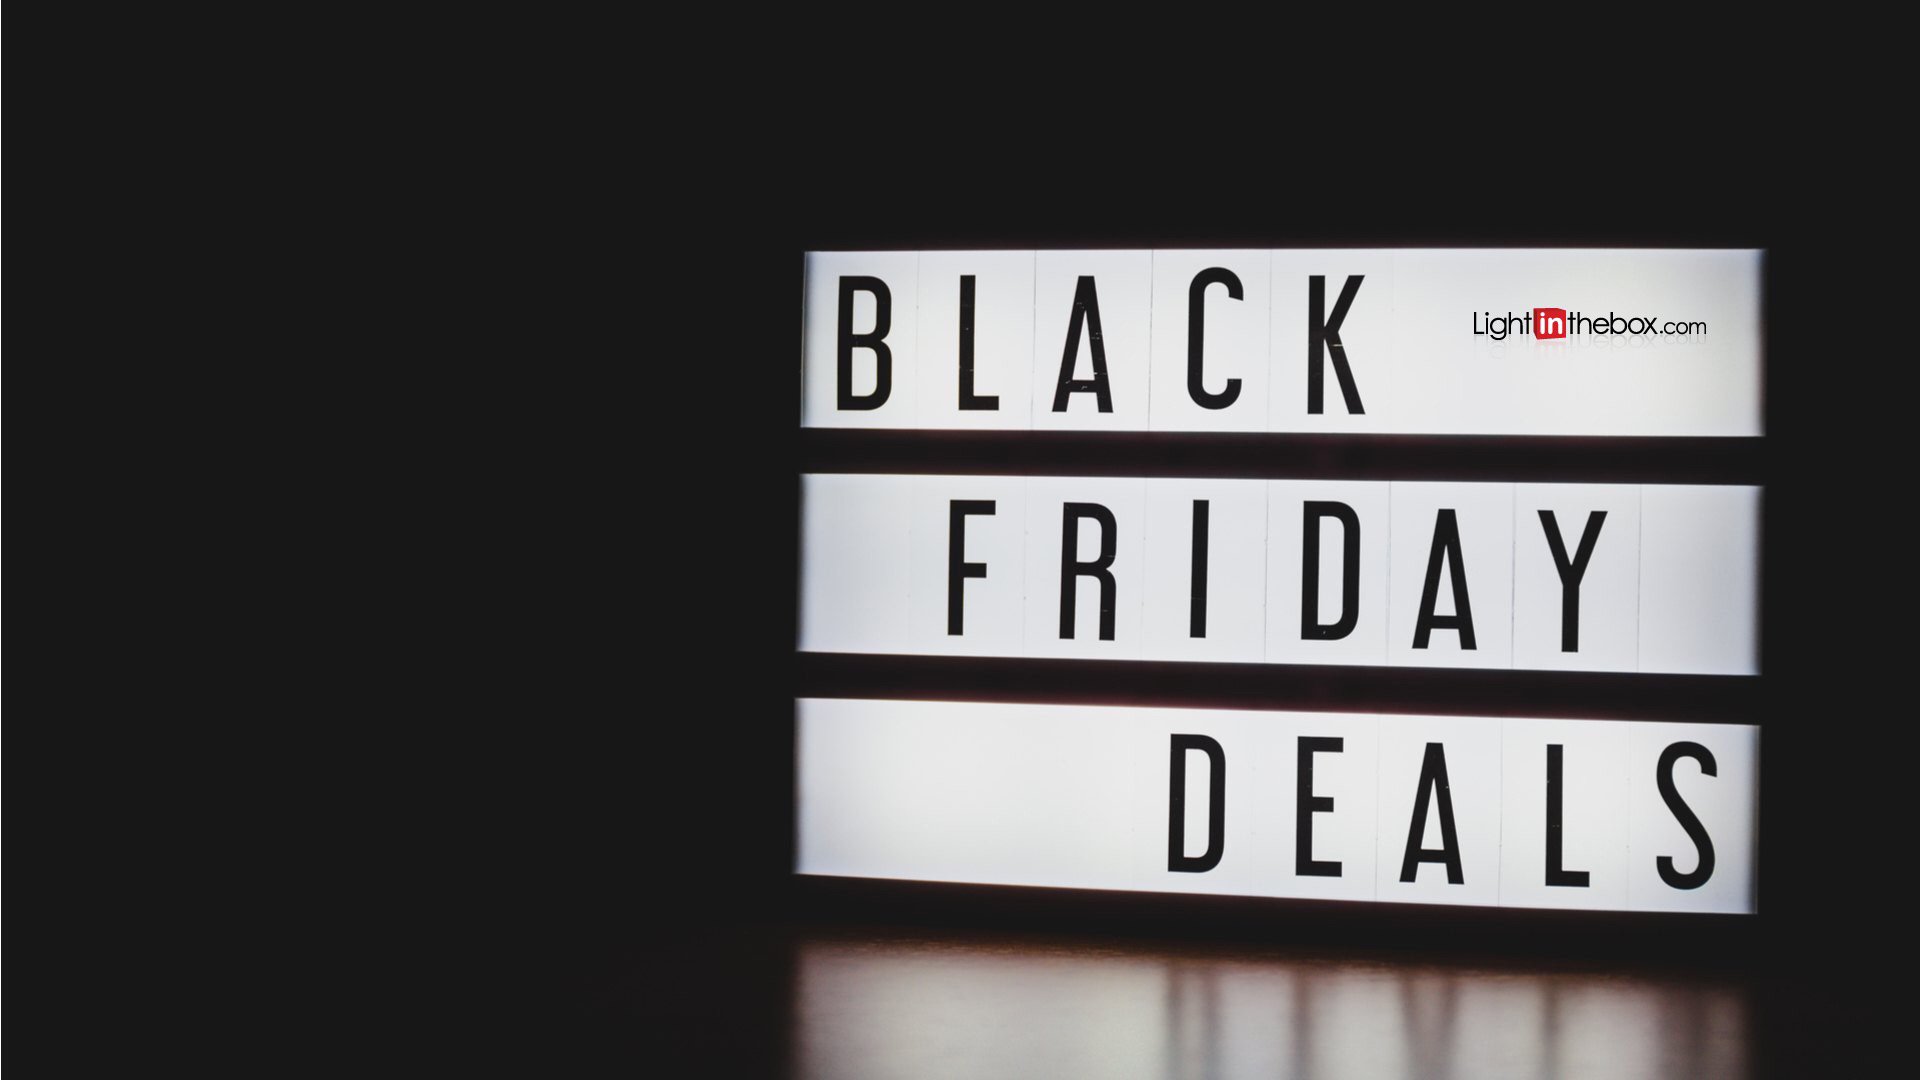 LightInTheBox Black Friday deals: including the Pocophone F1 | AndroidPIT